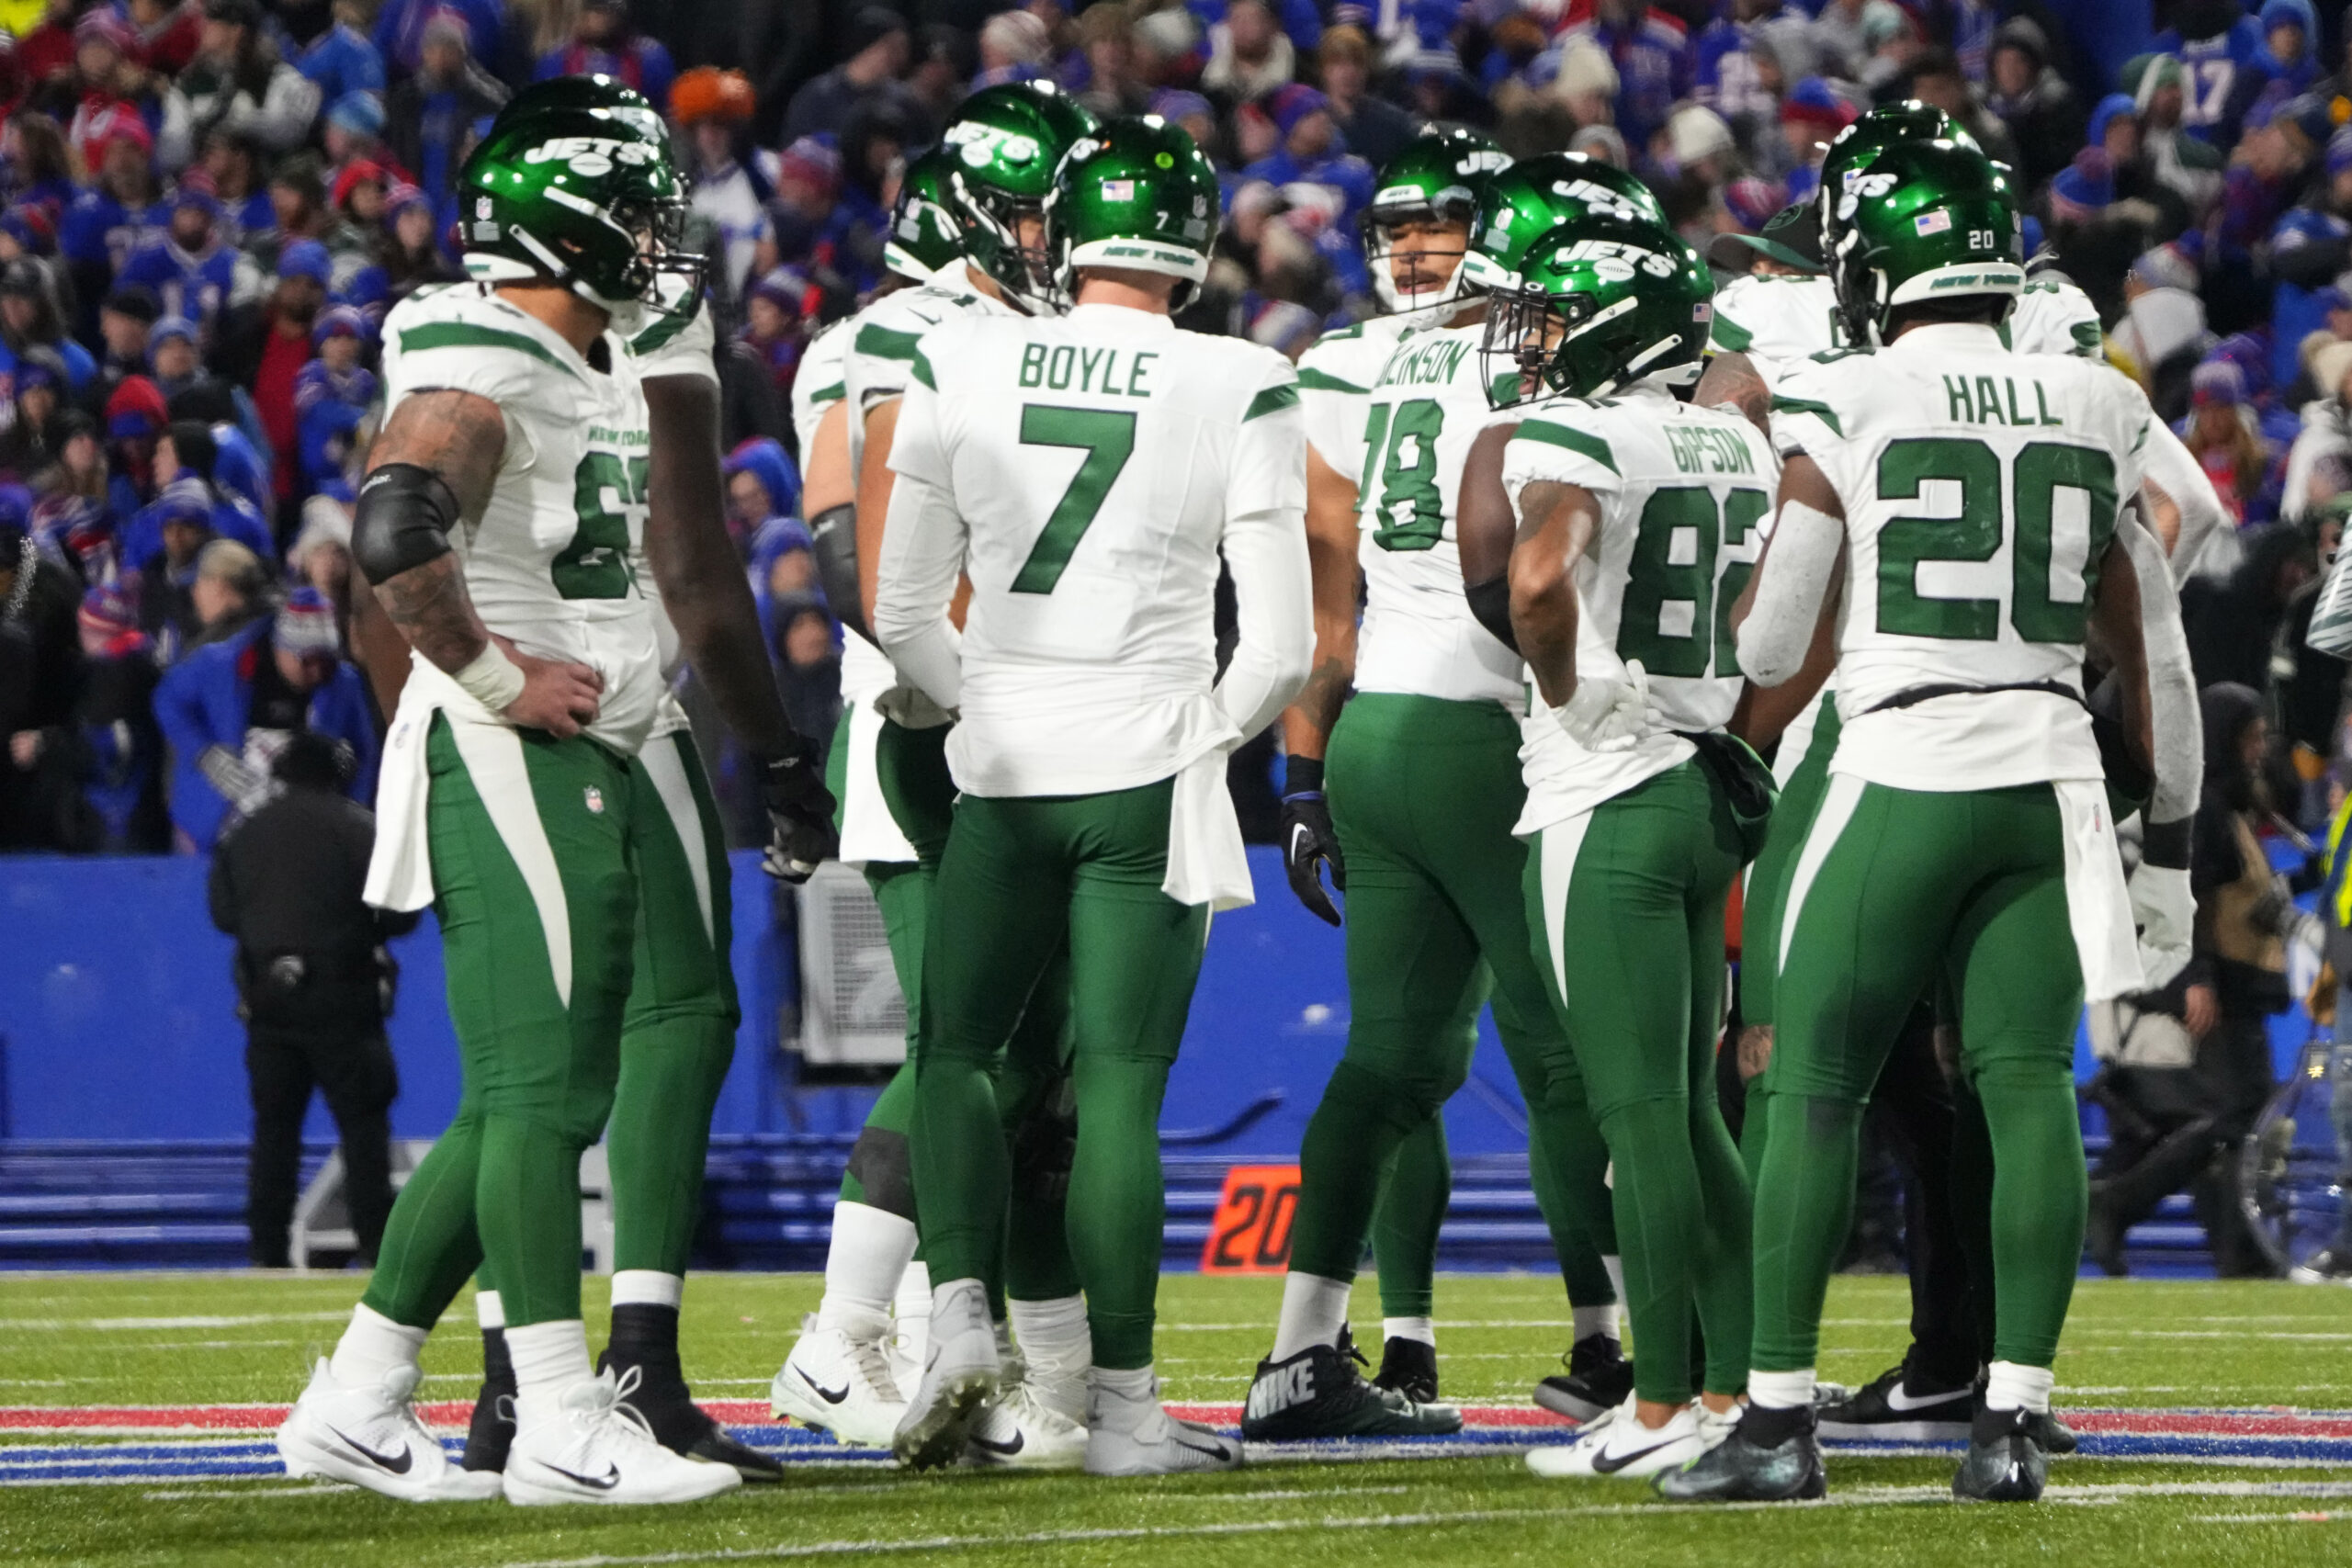 New York Jets quarterback Tim Boyle (7) in the huddle calling the play against the Buffalo Bills during the second half at Highmark Stadium.